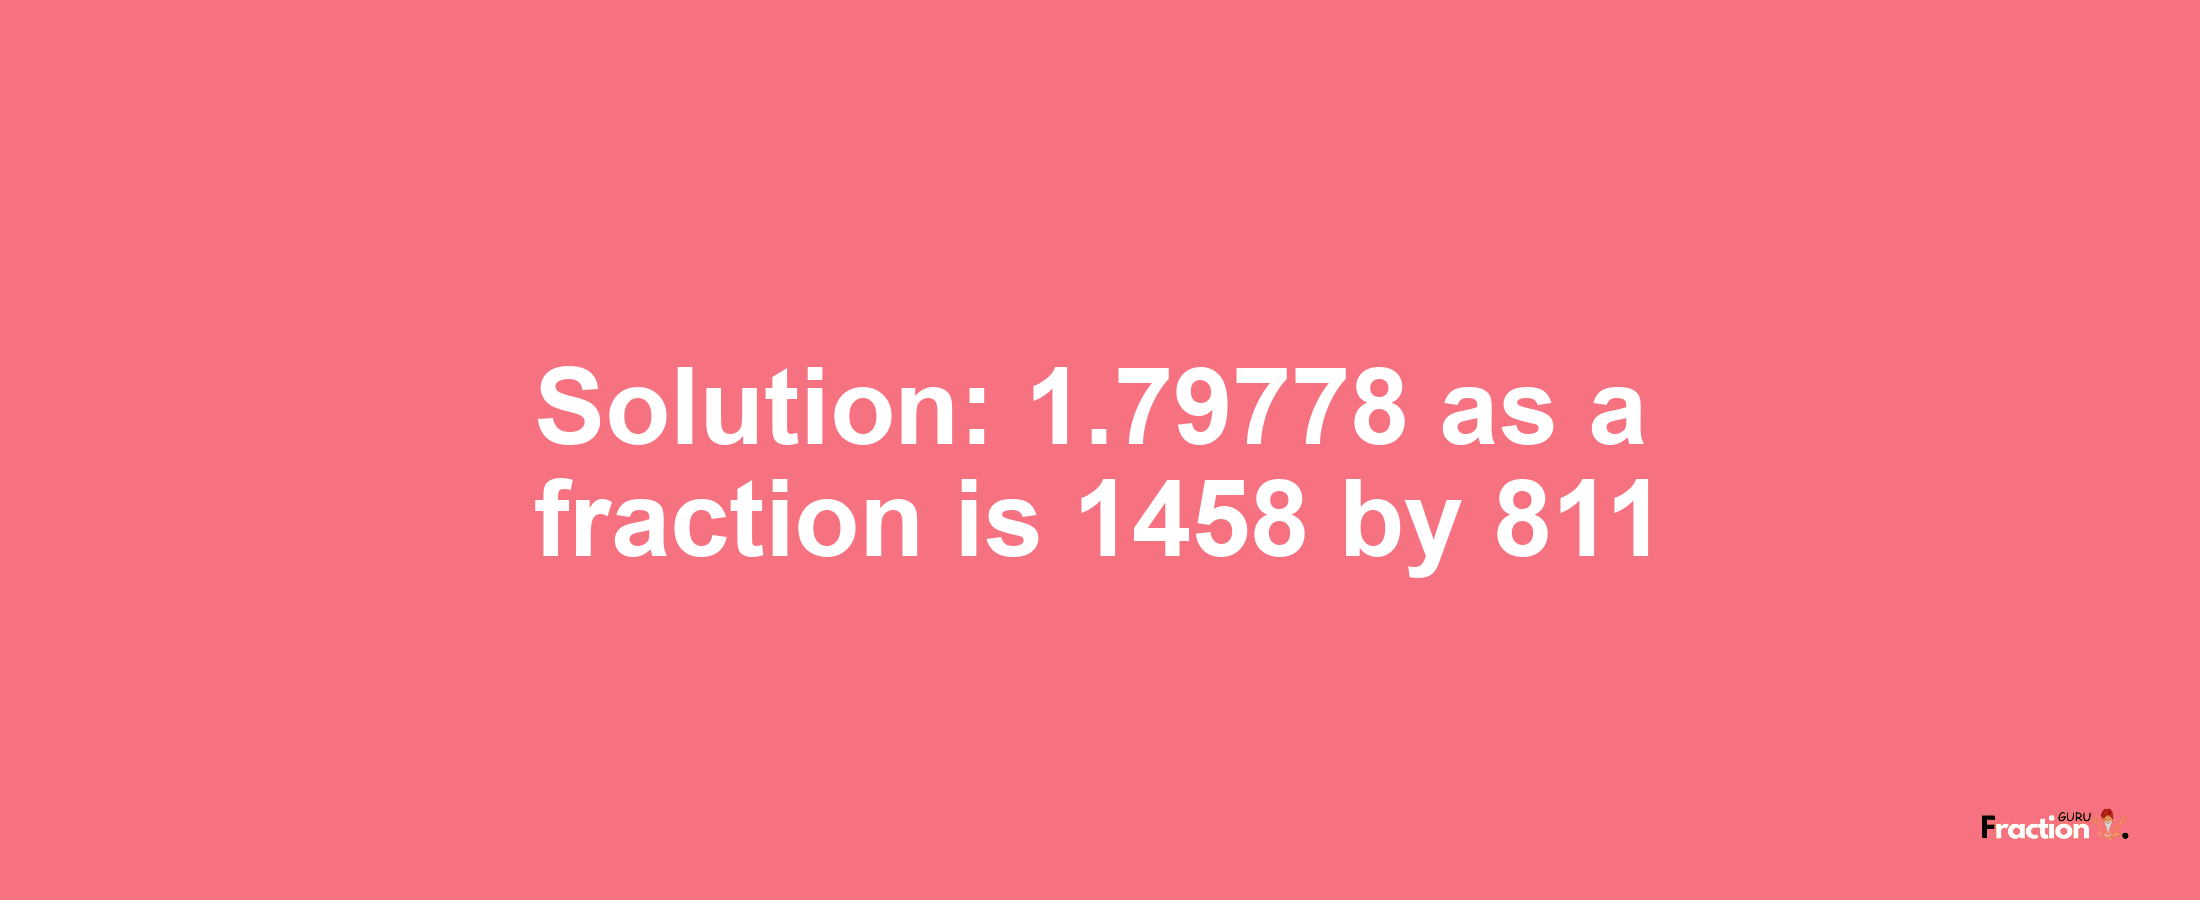 Solution:1.79778 as a fraction is 1458/811